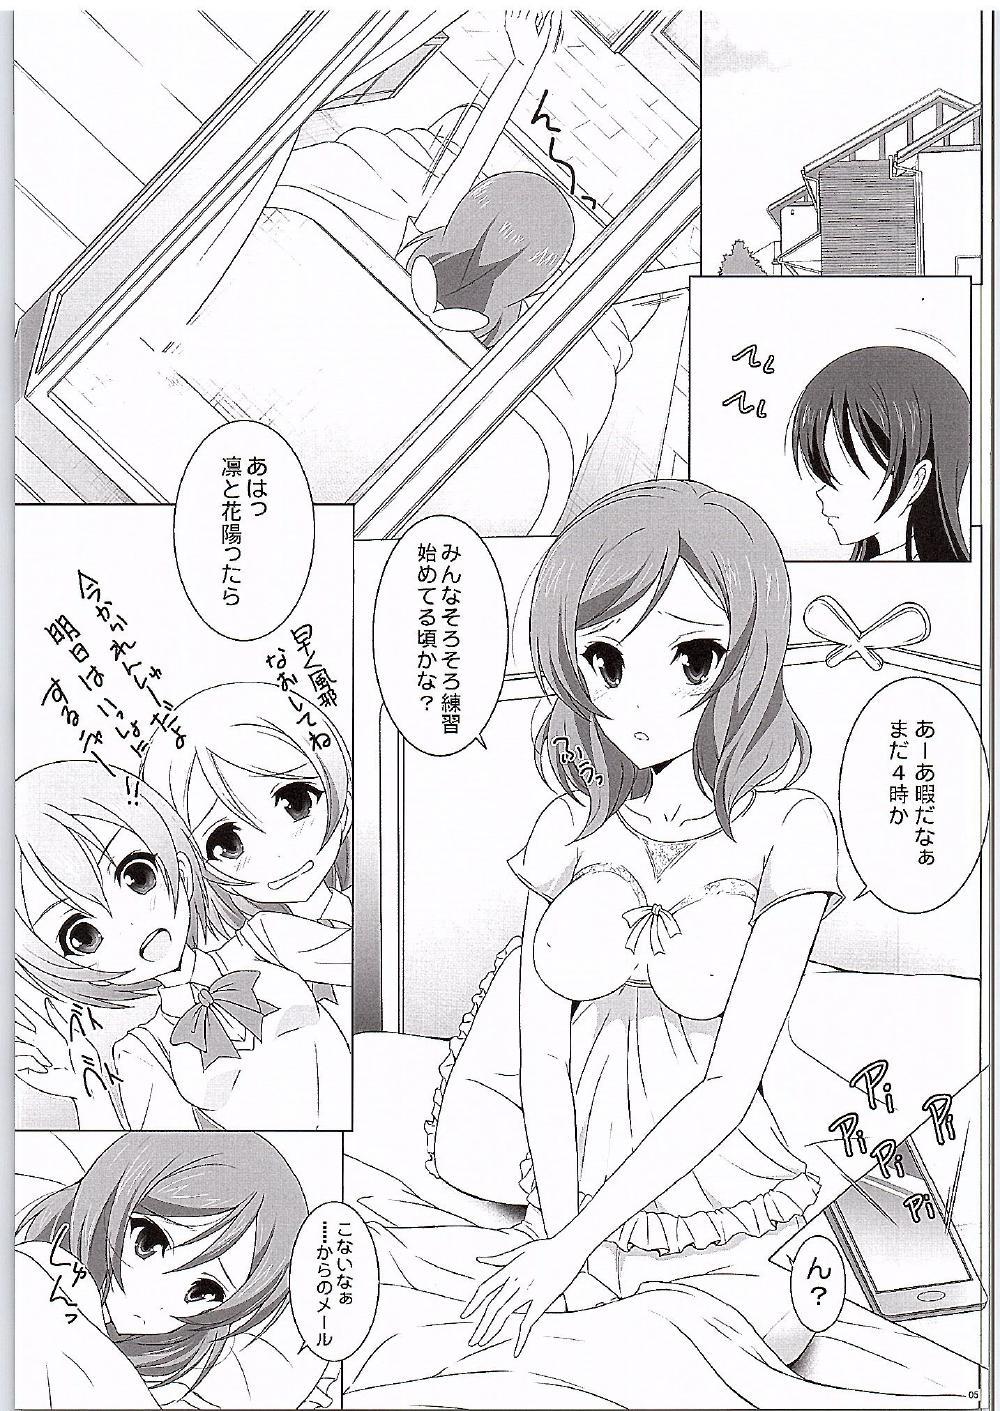 Playing UmiMaki Roll - Love live Sem Camisinha - Page 4